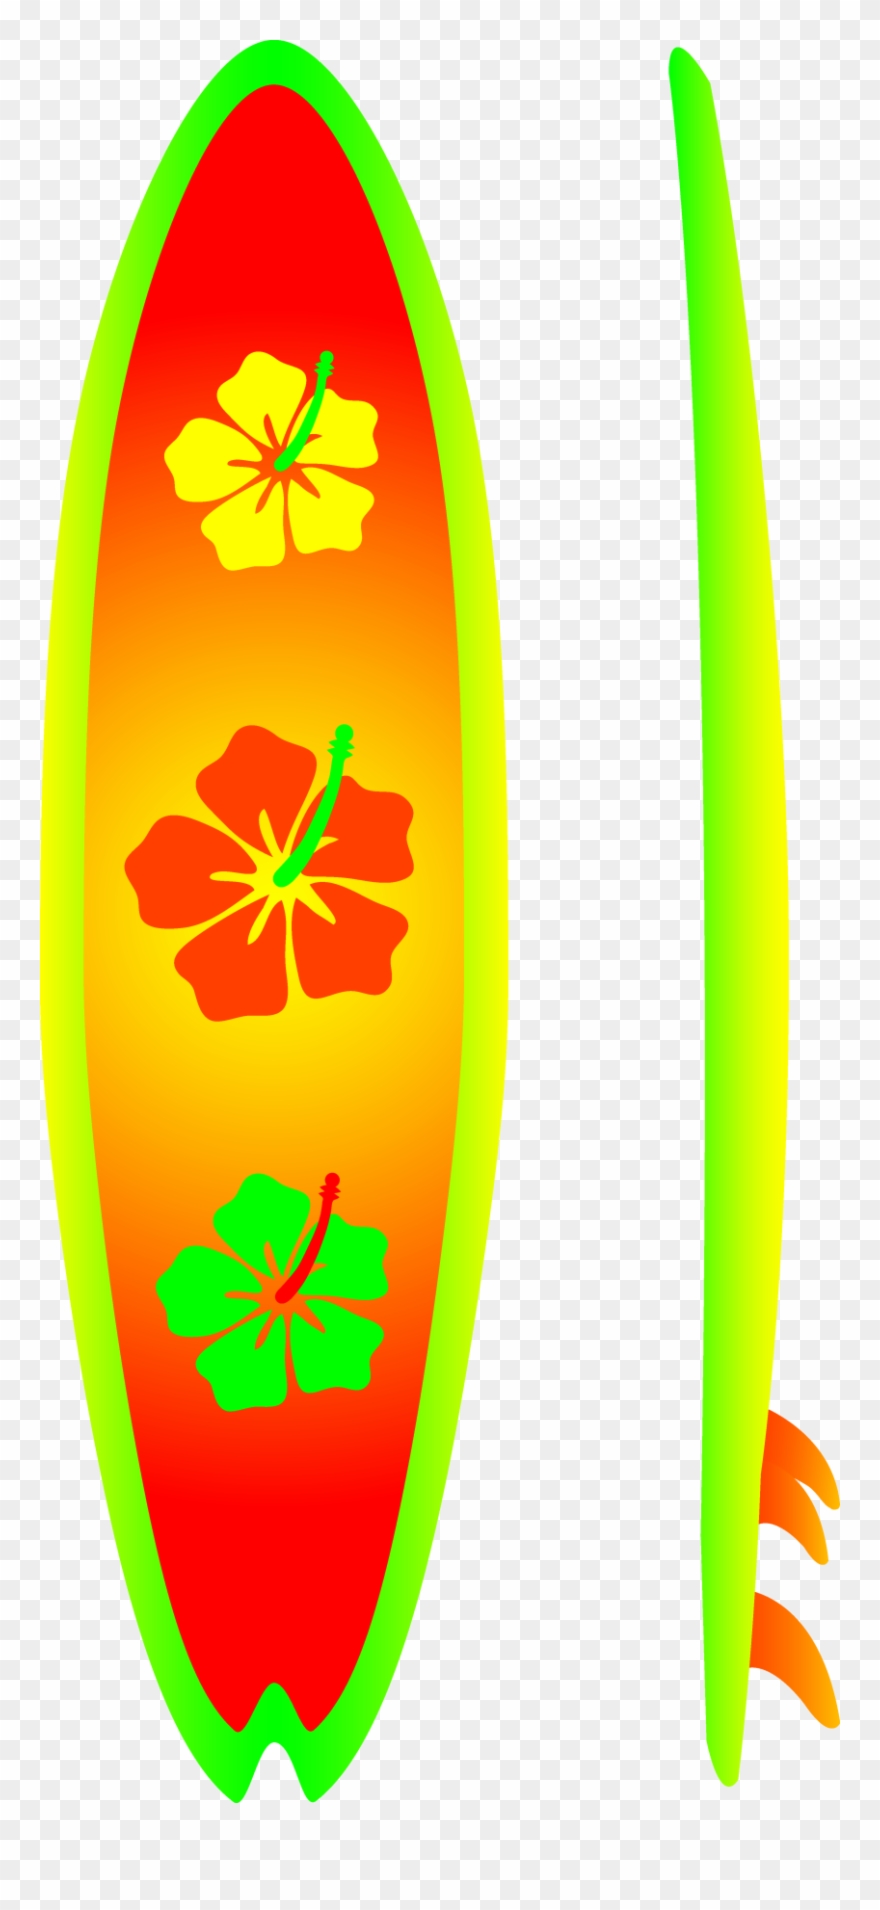 Neon surfboard with.